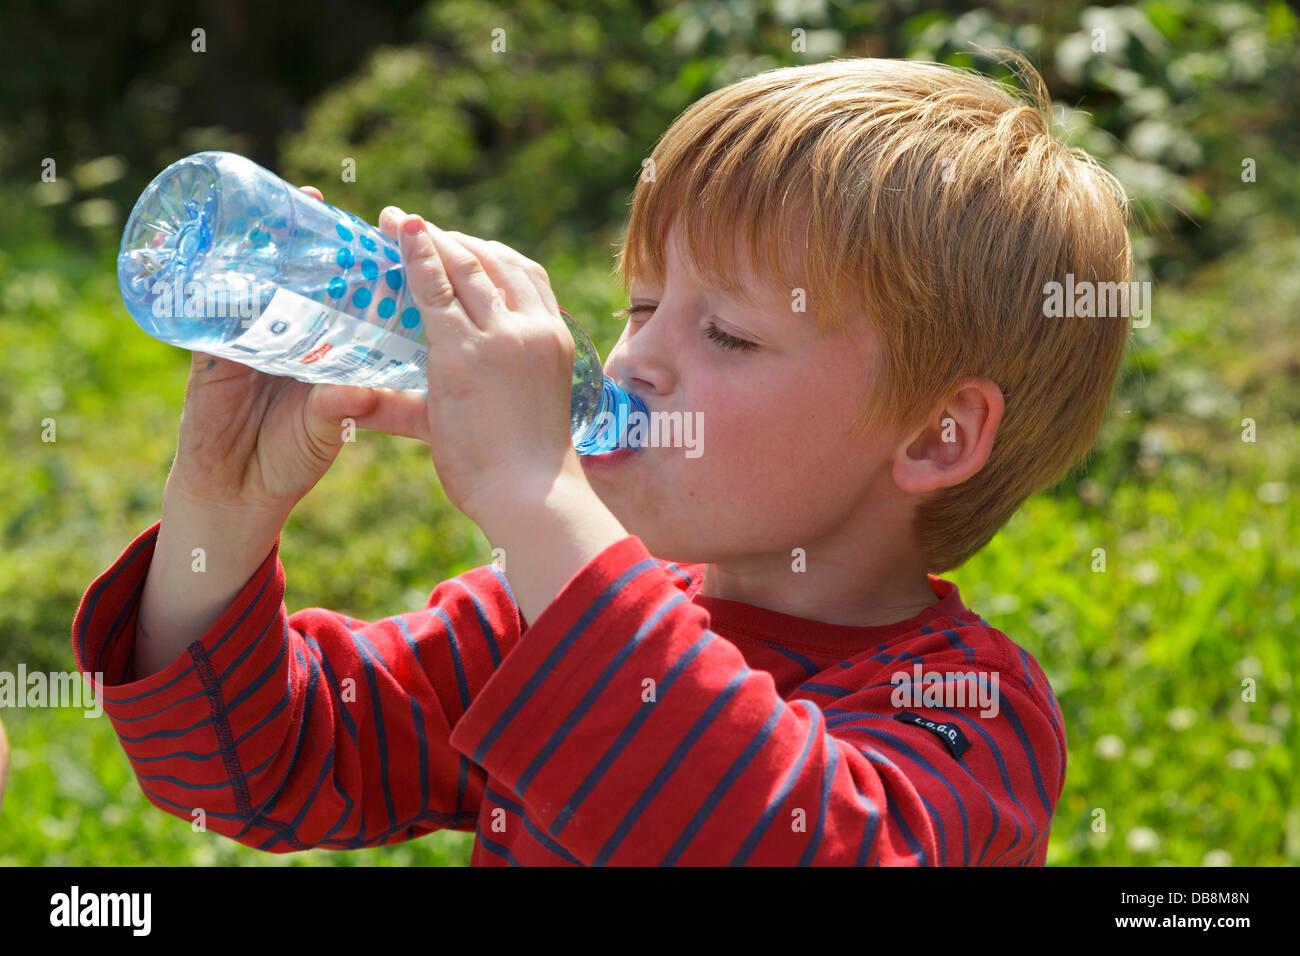 https://c8.alamy.com/comp/DB8M8N/young-boy-drinking-water-from-a-bottle-DB8M8N.jpg